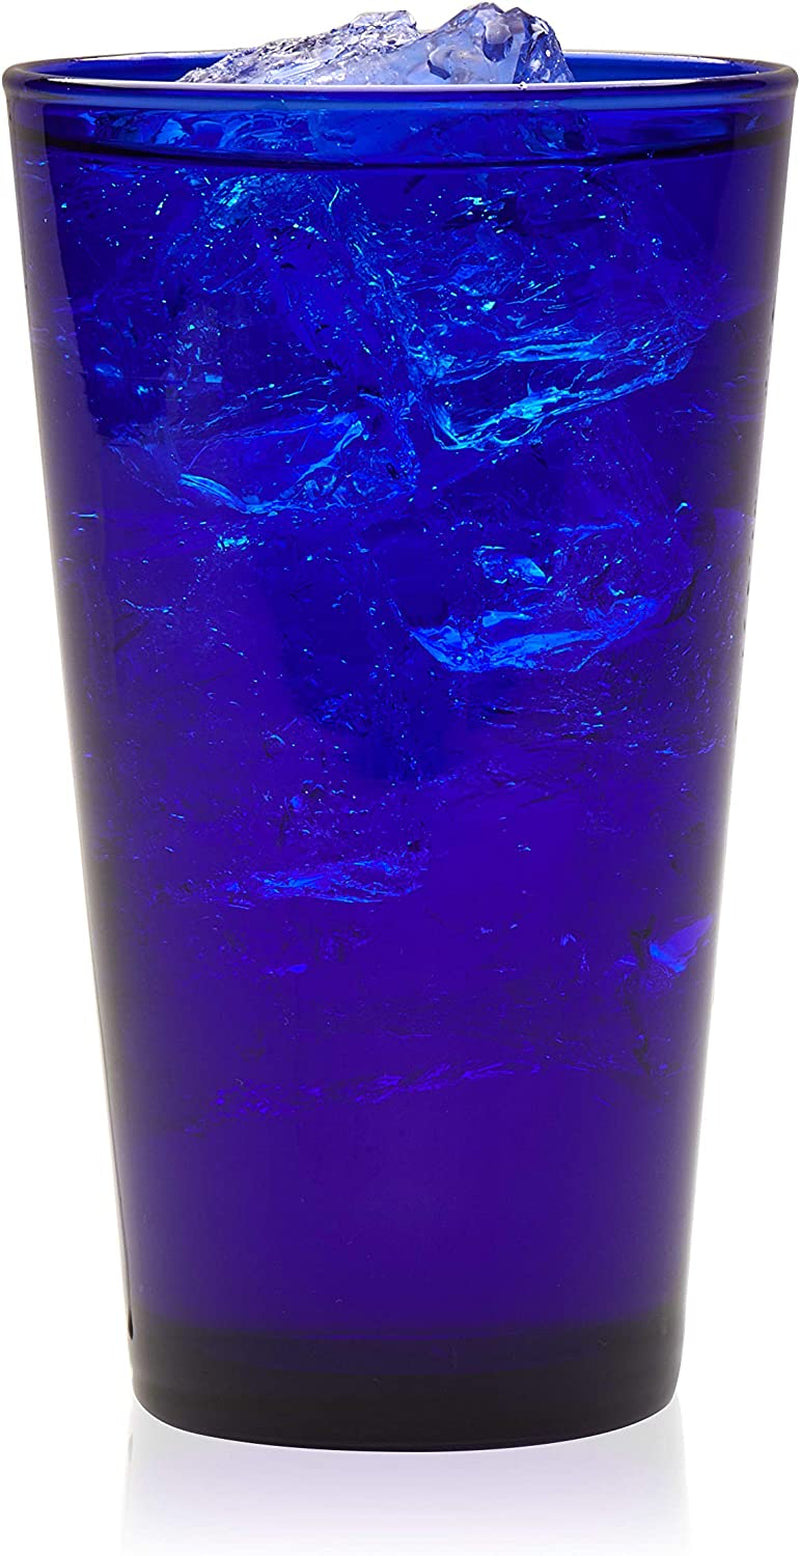 Libbey Cobalt Flare Tumbler Glasses, 17.25-Ounce, Set of 8 Home & Garden > Kitchen & Dining > Tableware > Drinkware Libbey   